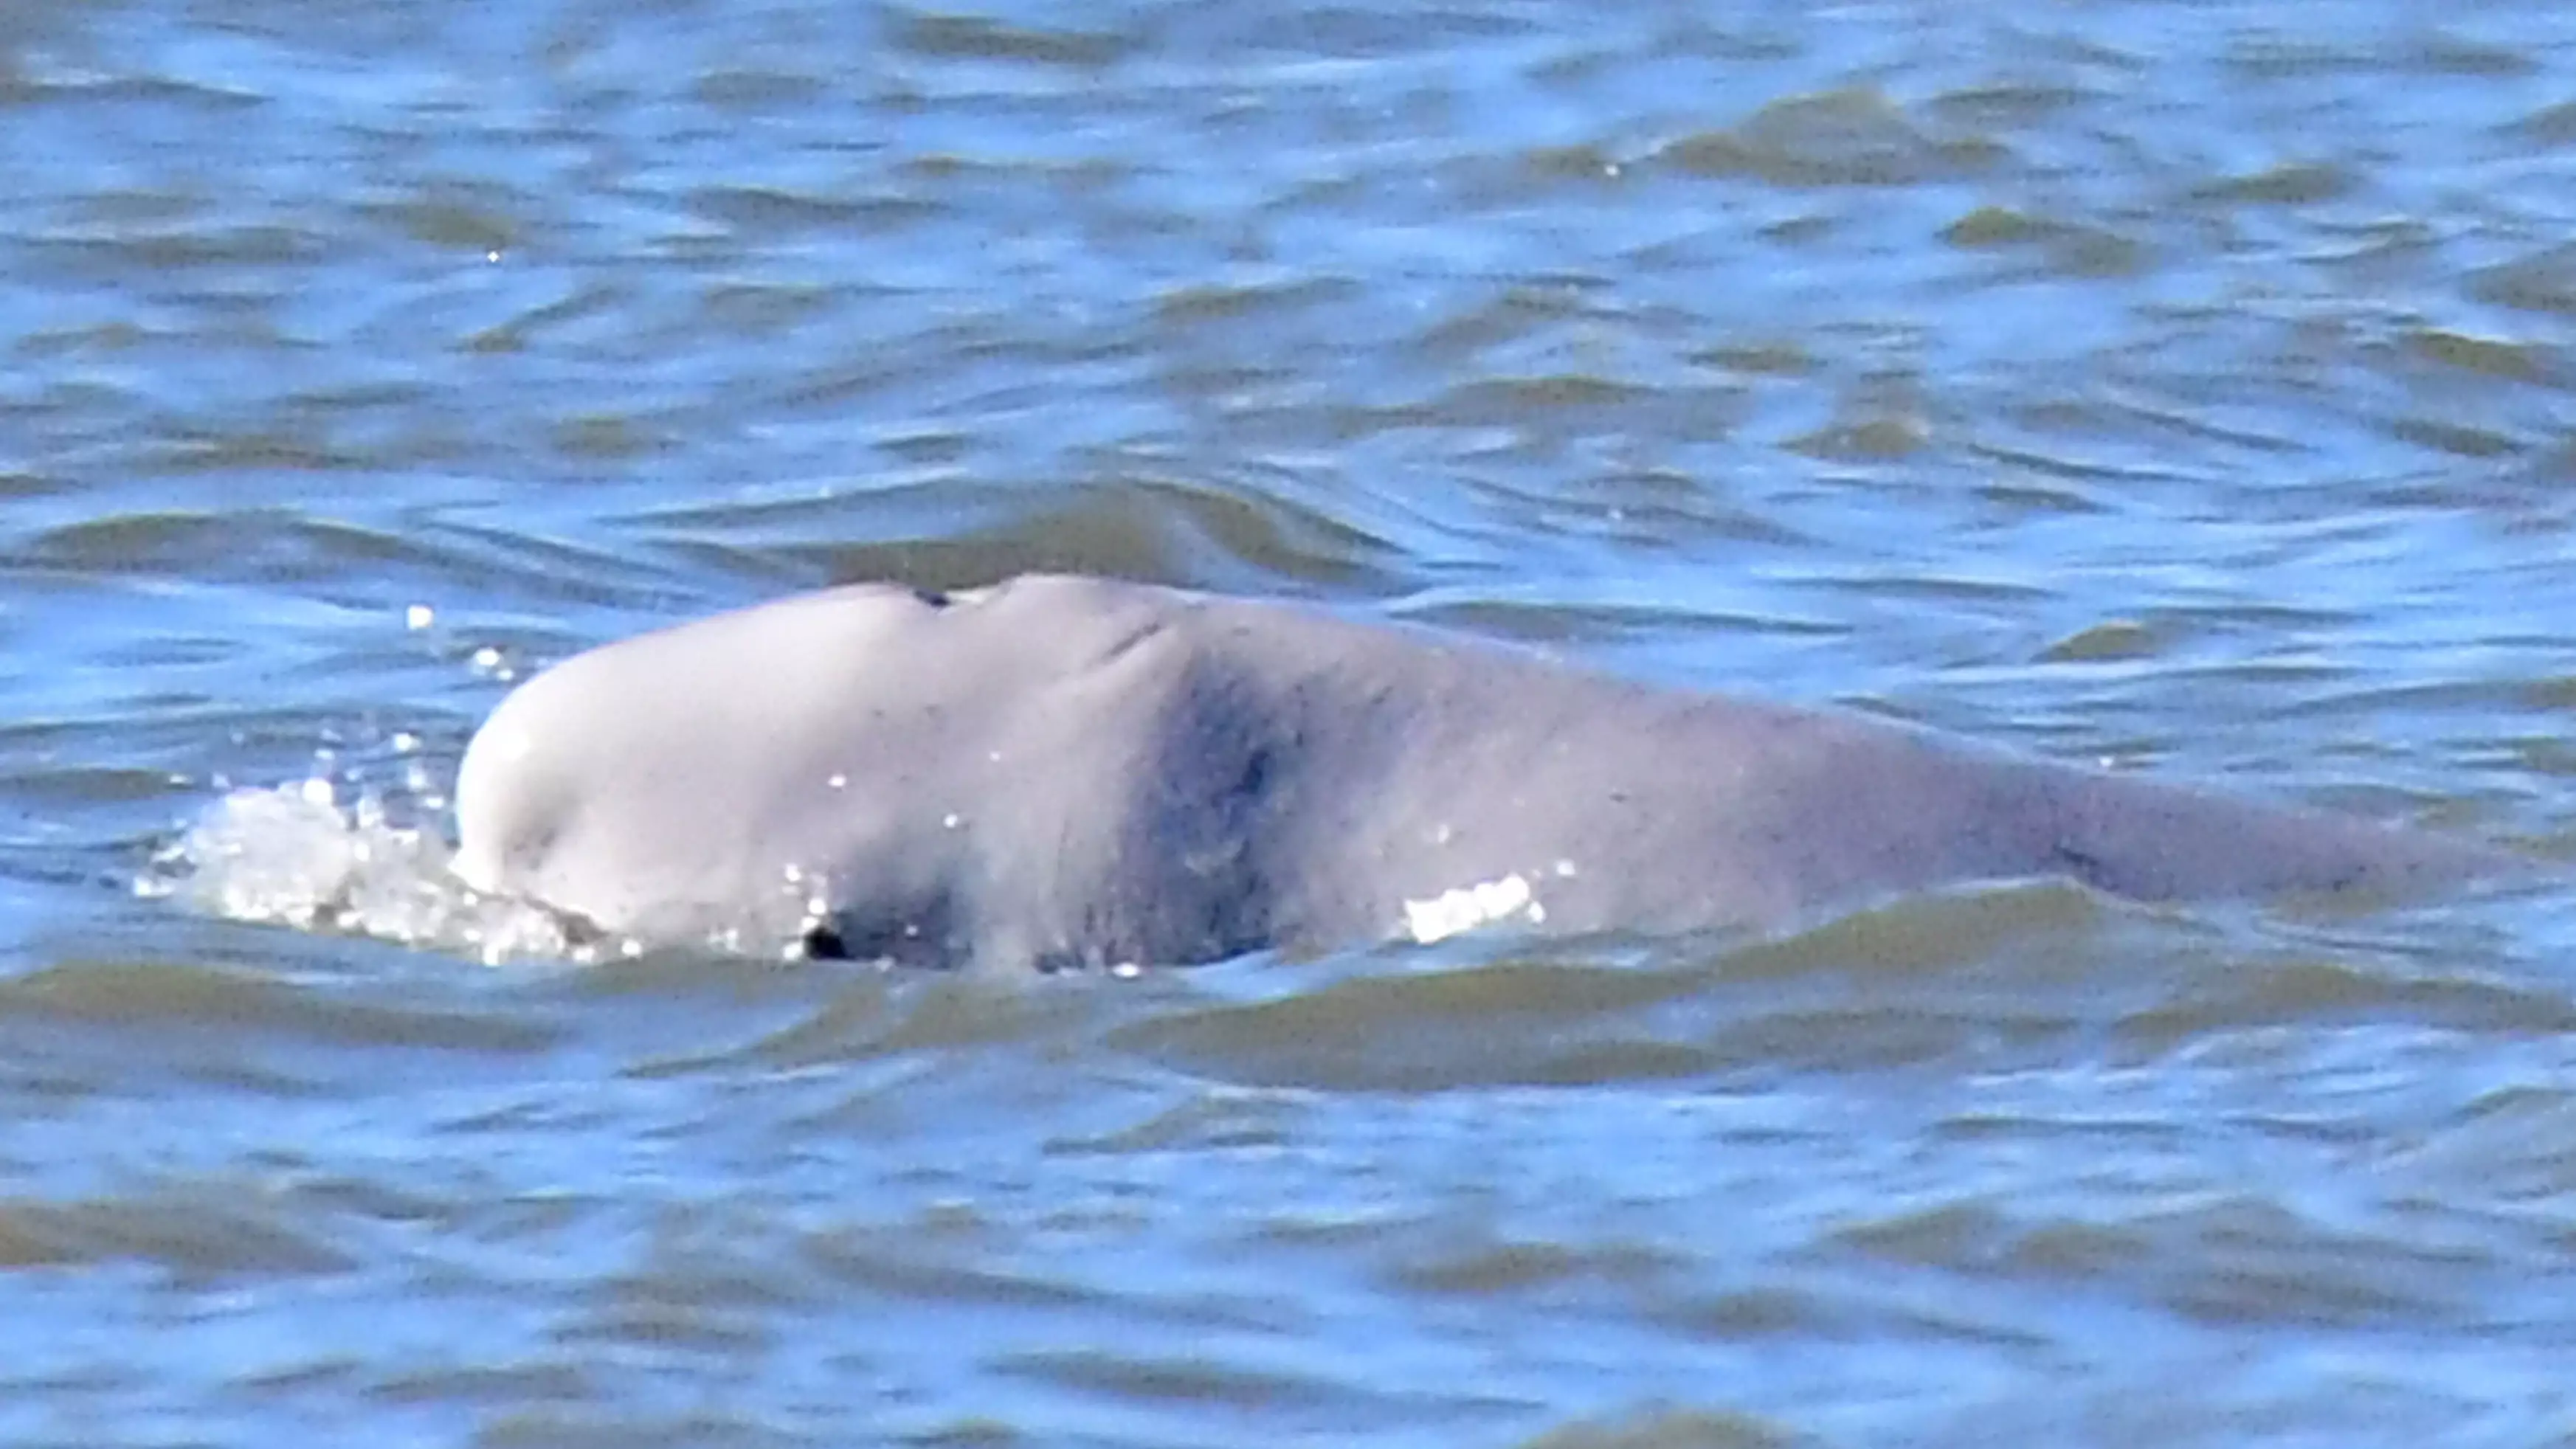 Thames River Firework Display Cancelled Because Of 'Benny' The Beluga Whale